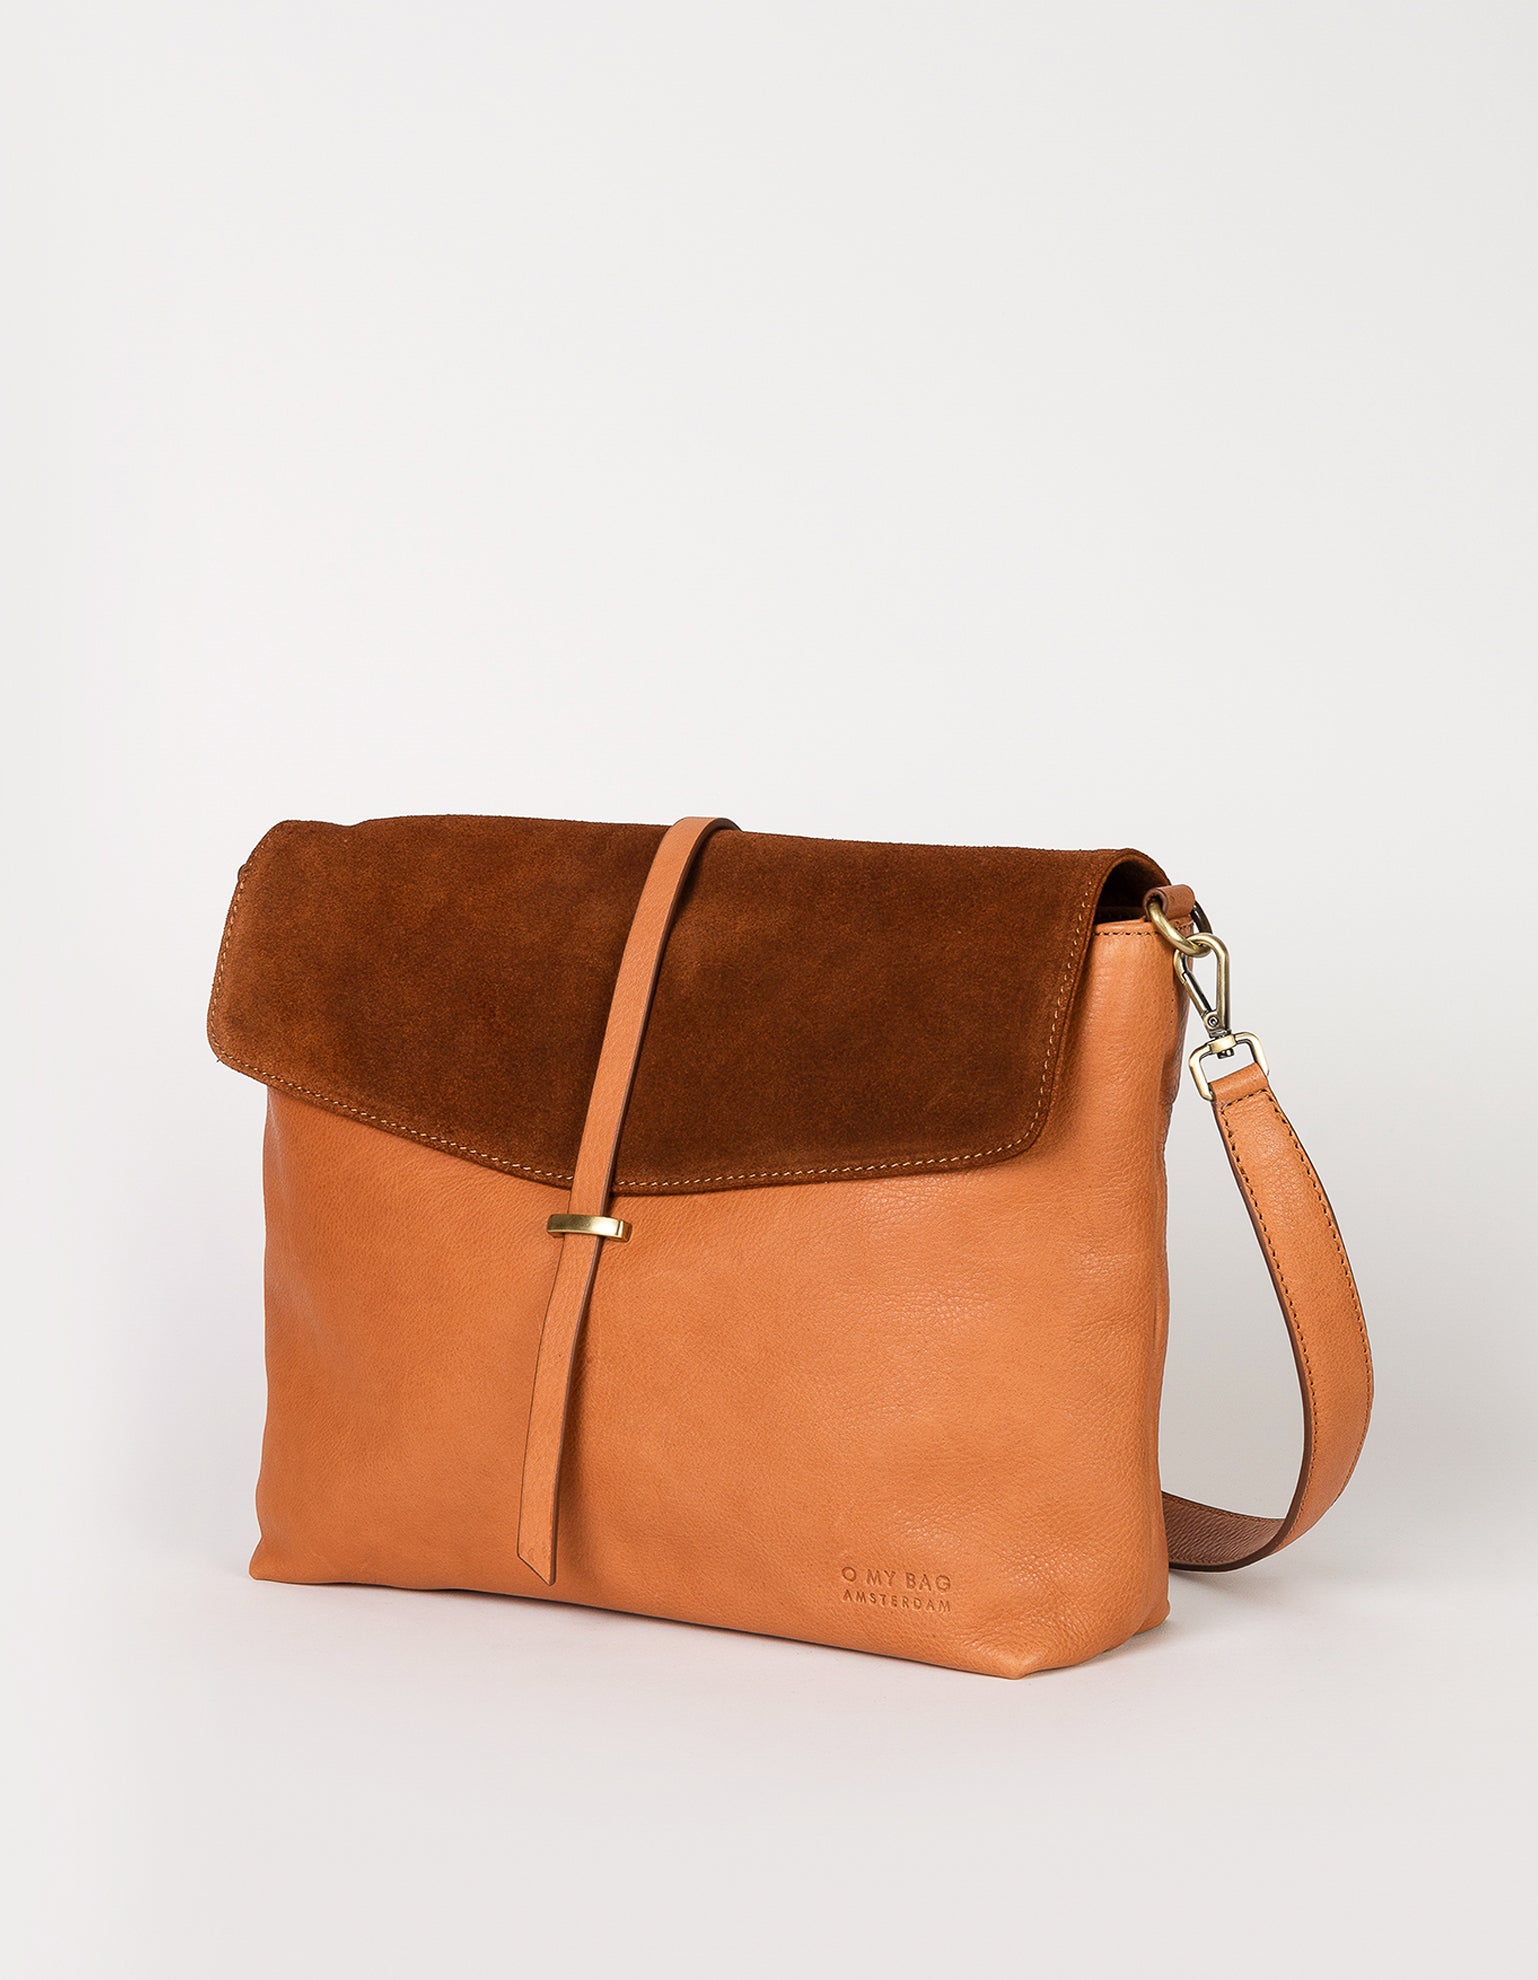 Wild Oak Soft Grain & Suede leather womens handbag. Square shape with an adjustable strap. Side product image.